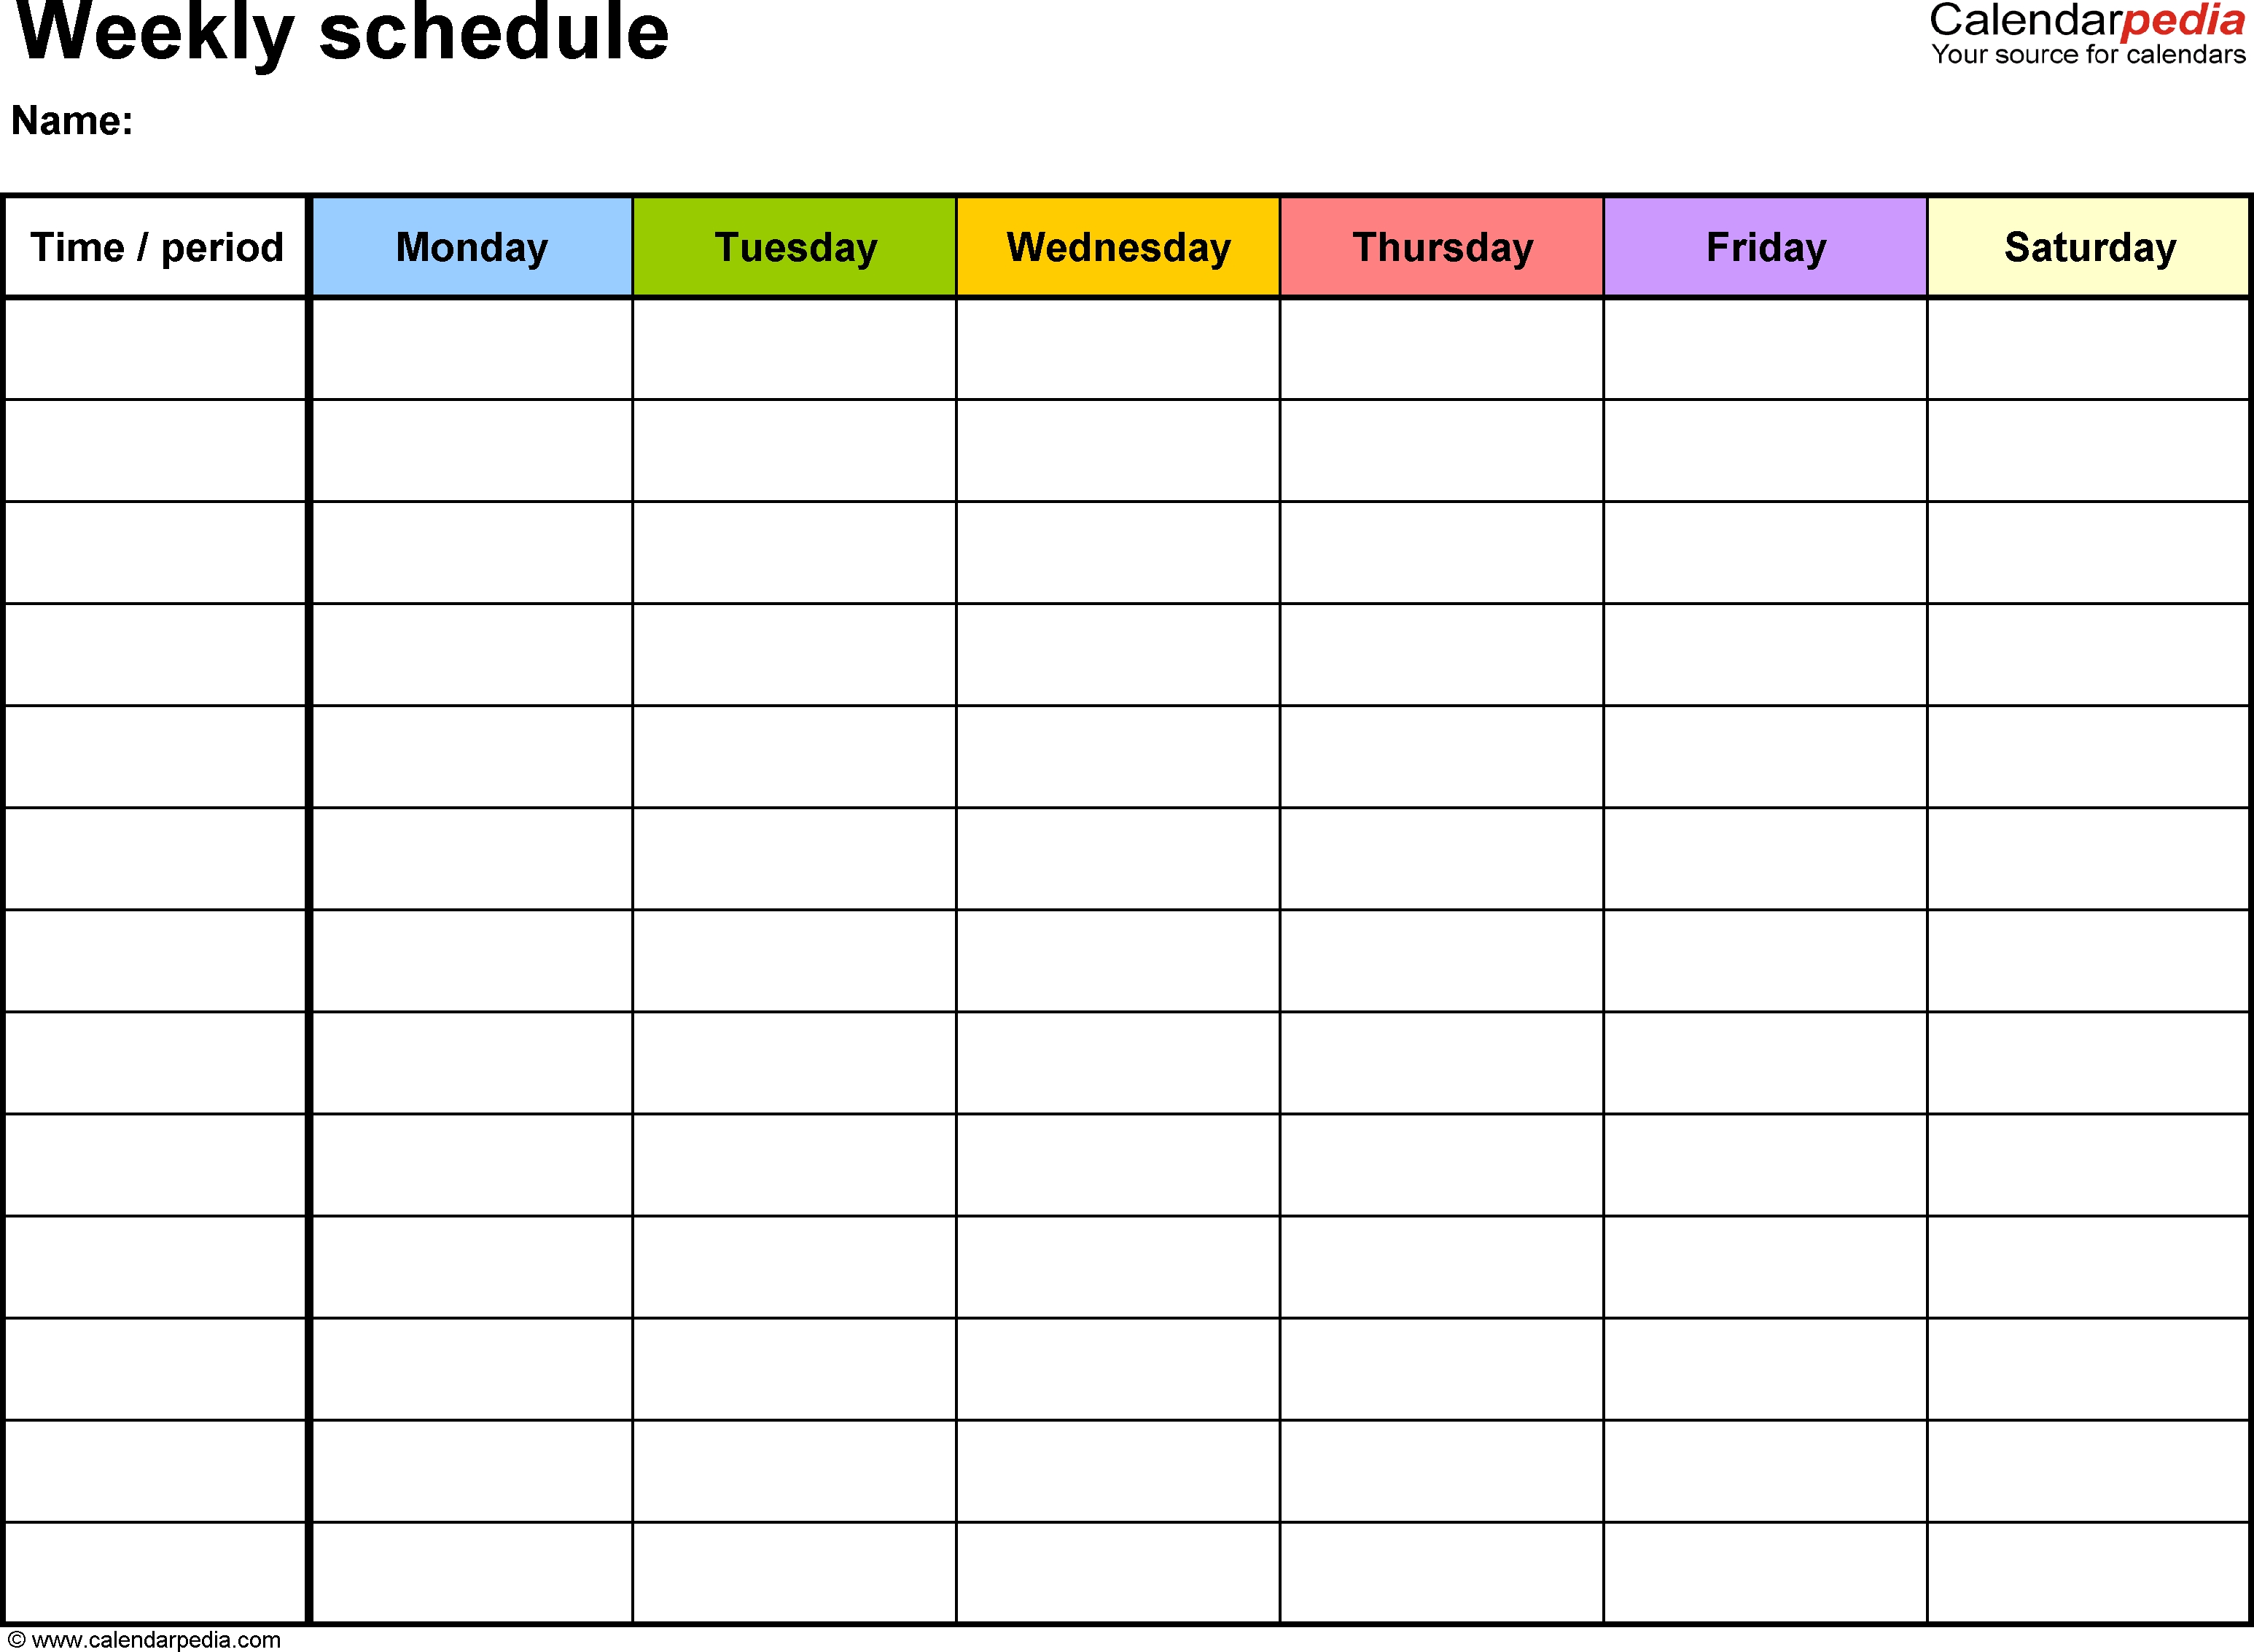 Free Weekly Schedule Templates For Word - 18 Templates intended for Monday Thru Friday Calendar Template